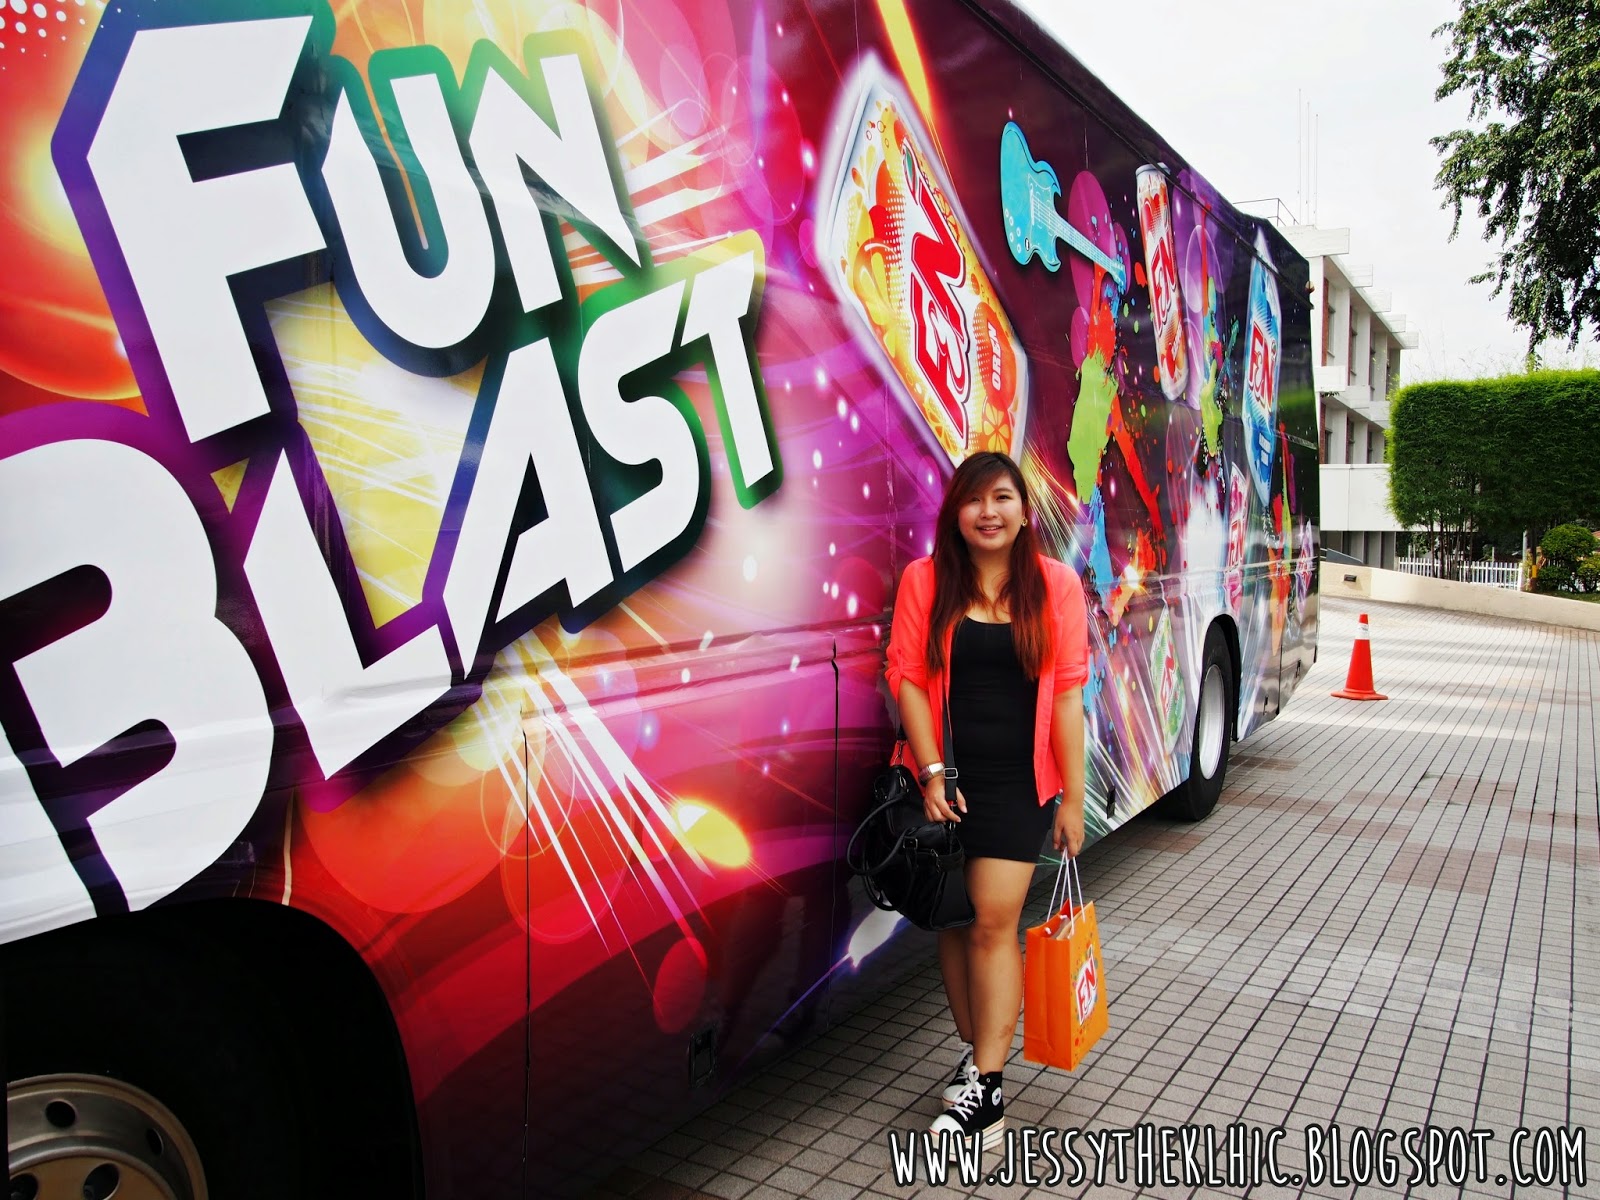 Contest: Stand A Chance to Party On the Bus (F&N Fun Blast ...